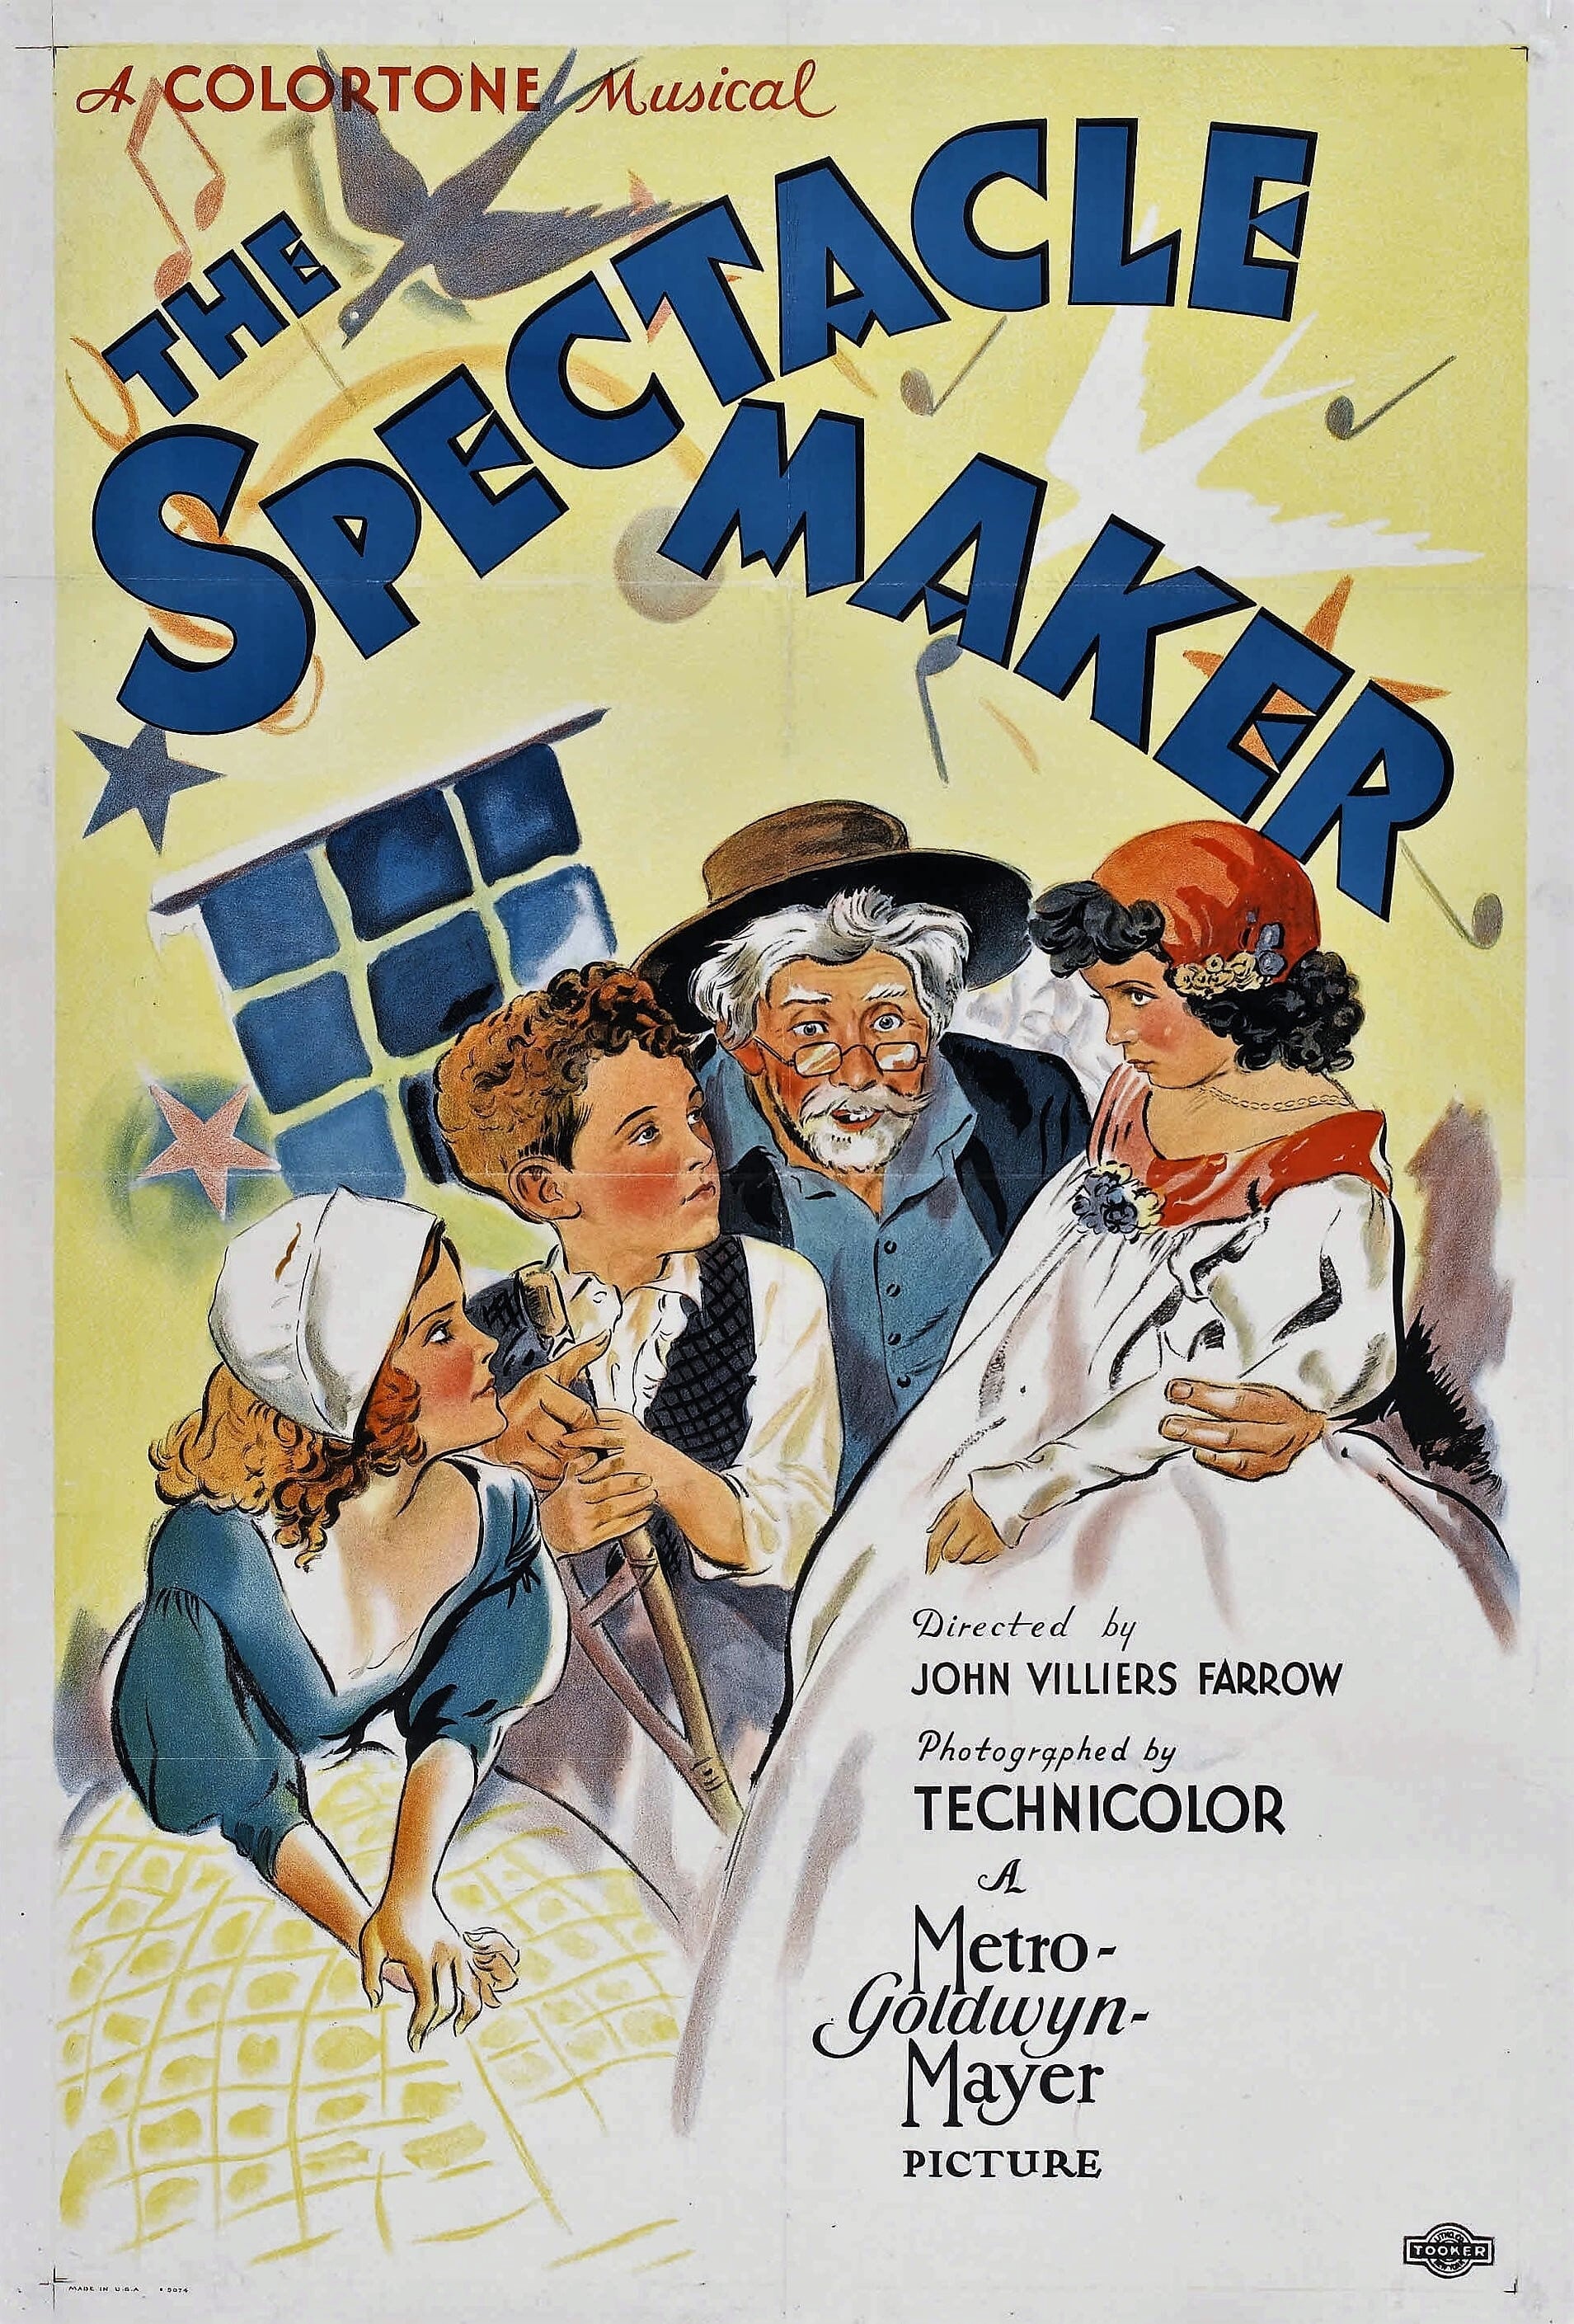 The Spectacle Maker